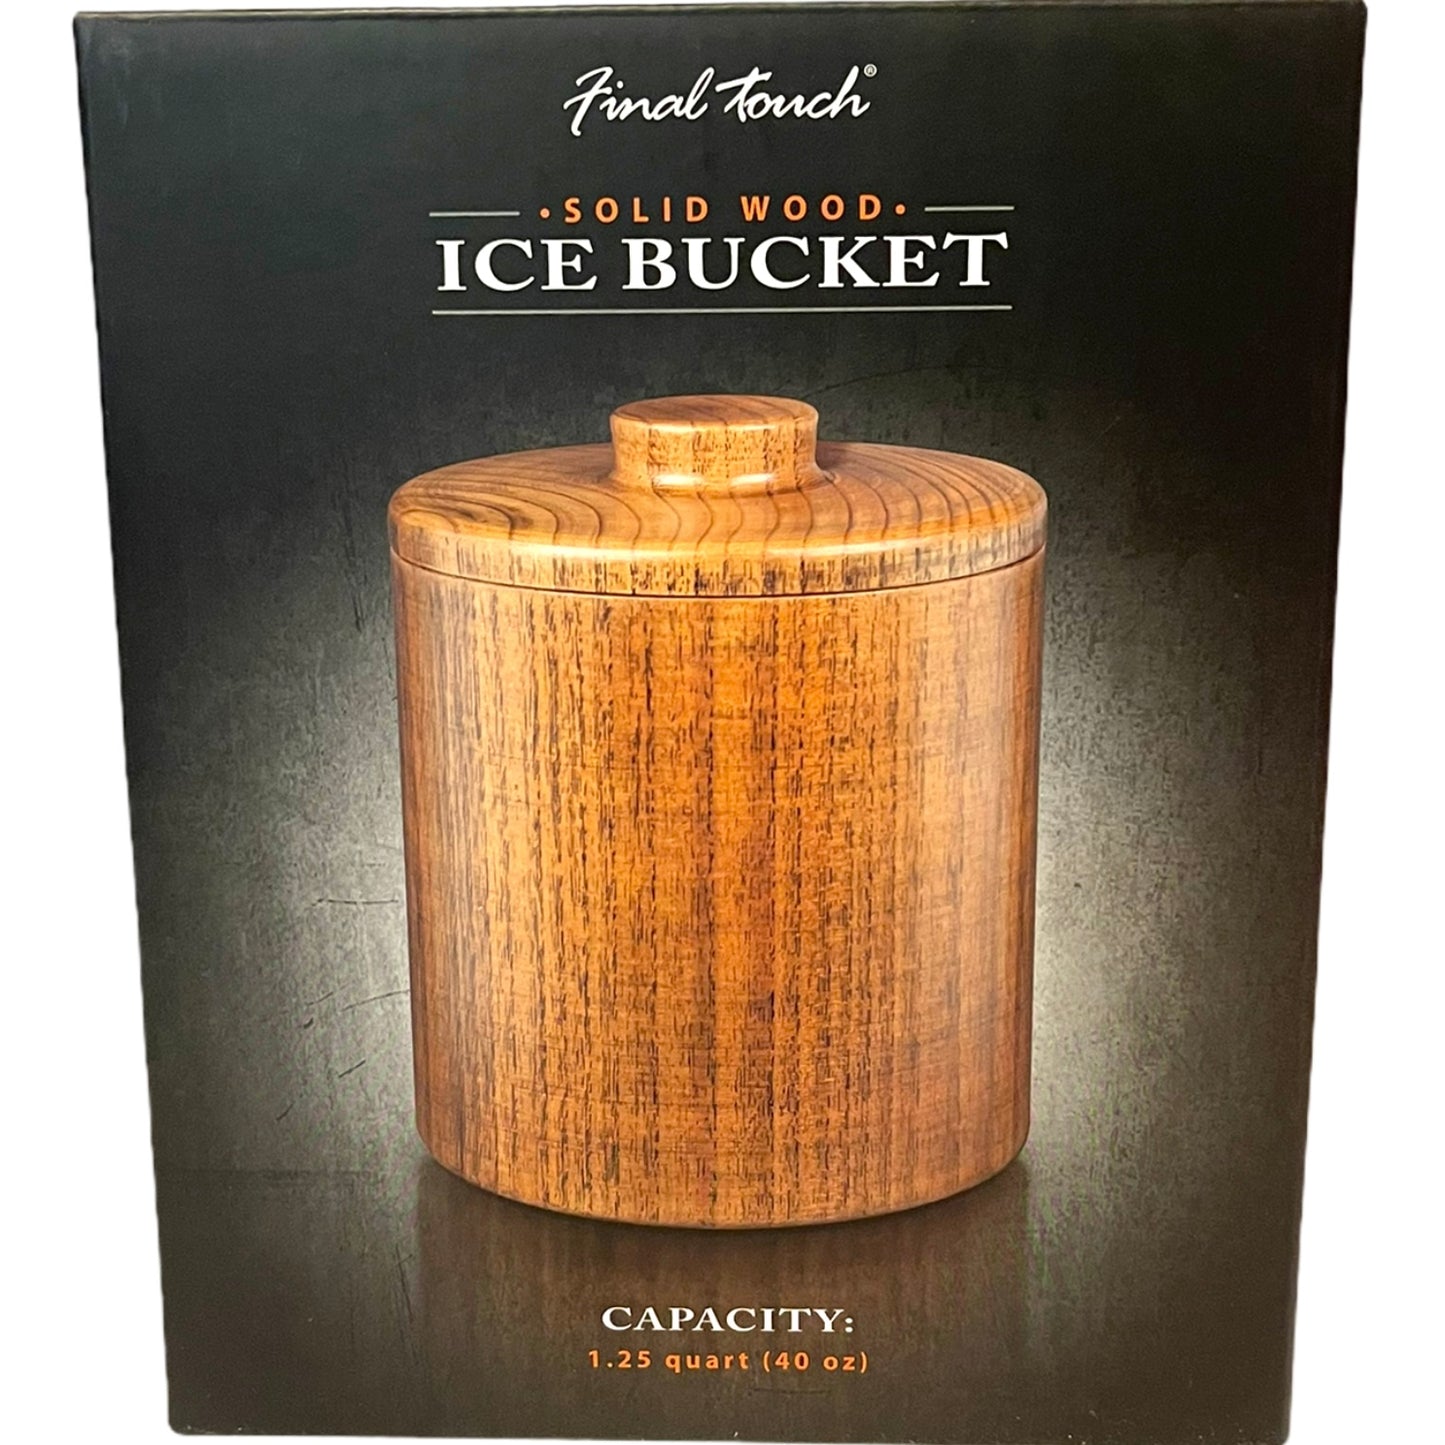 FINAL TOUCH SOLID WOOD ICE BUCKET